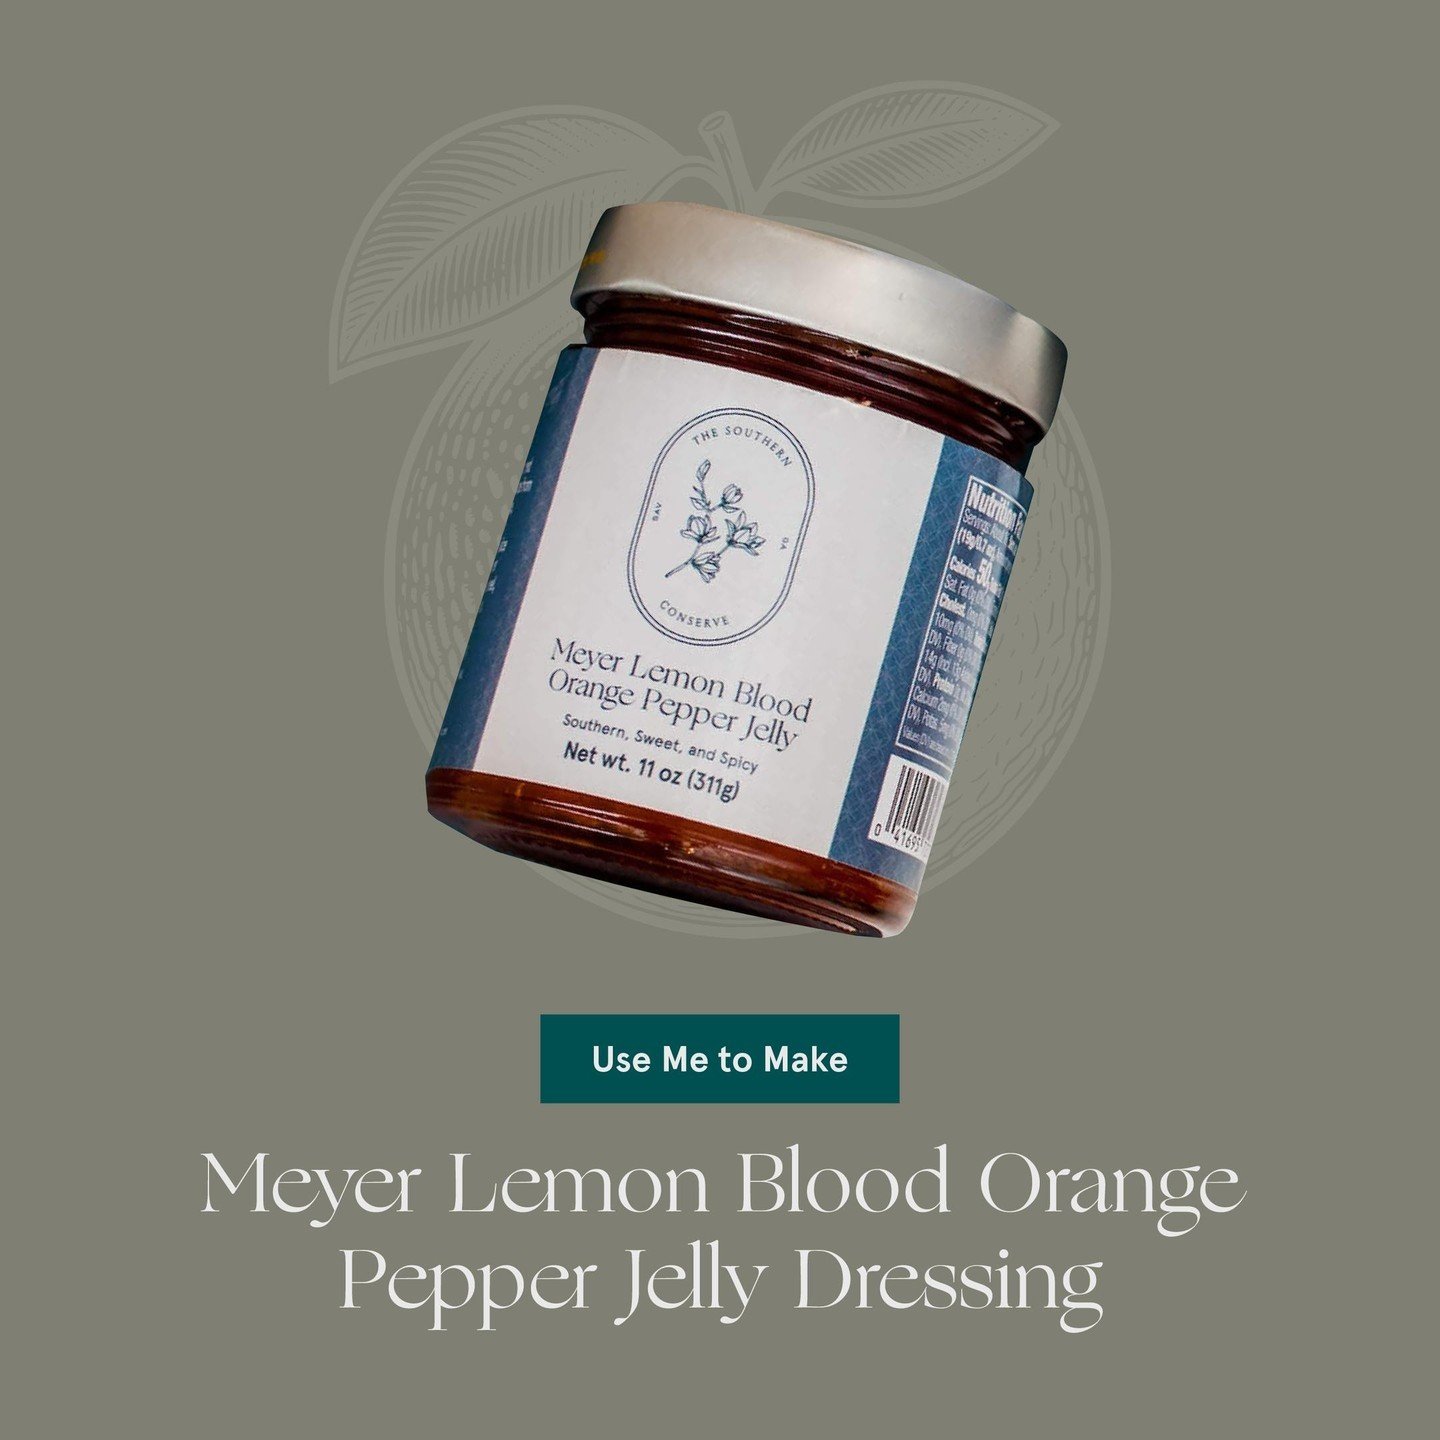 Snag our Meyer Lemon Blood Orange Pepper Jelly and learn how to quickly turn it into a delicious and easy to use salad dressing! Find the recipe on our website under our journal. Visit thesouthernconserve.com.⁠
⁠
#thesouthernconserve #visitsavannah #